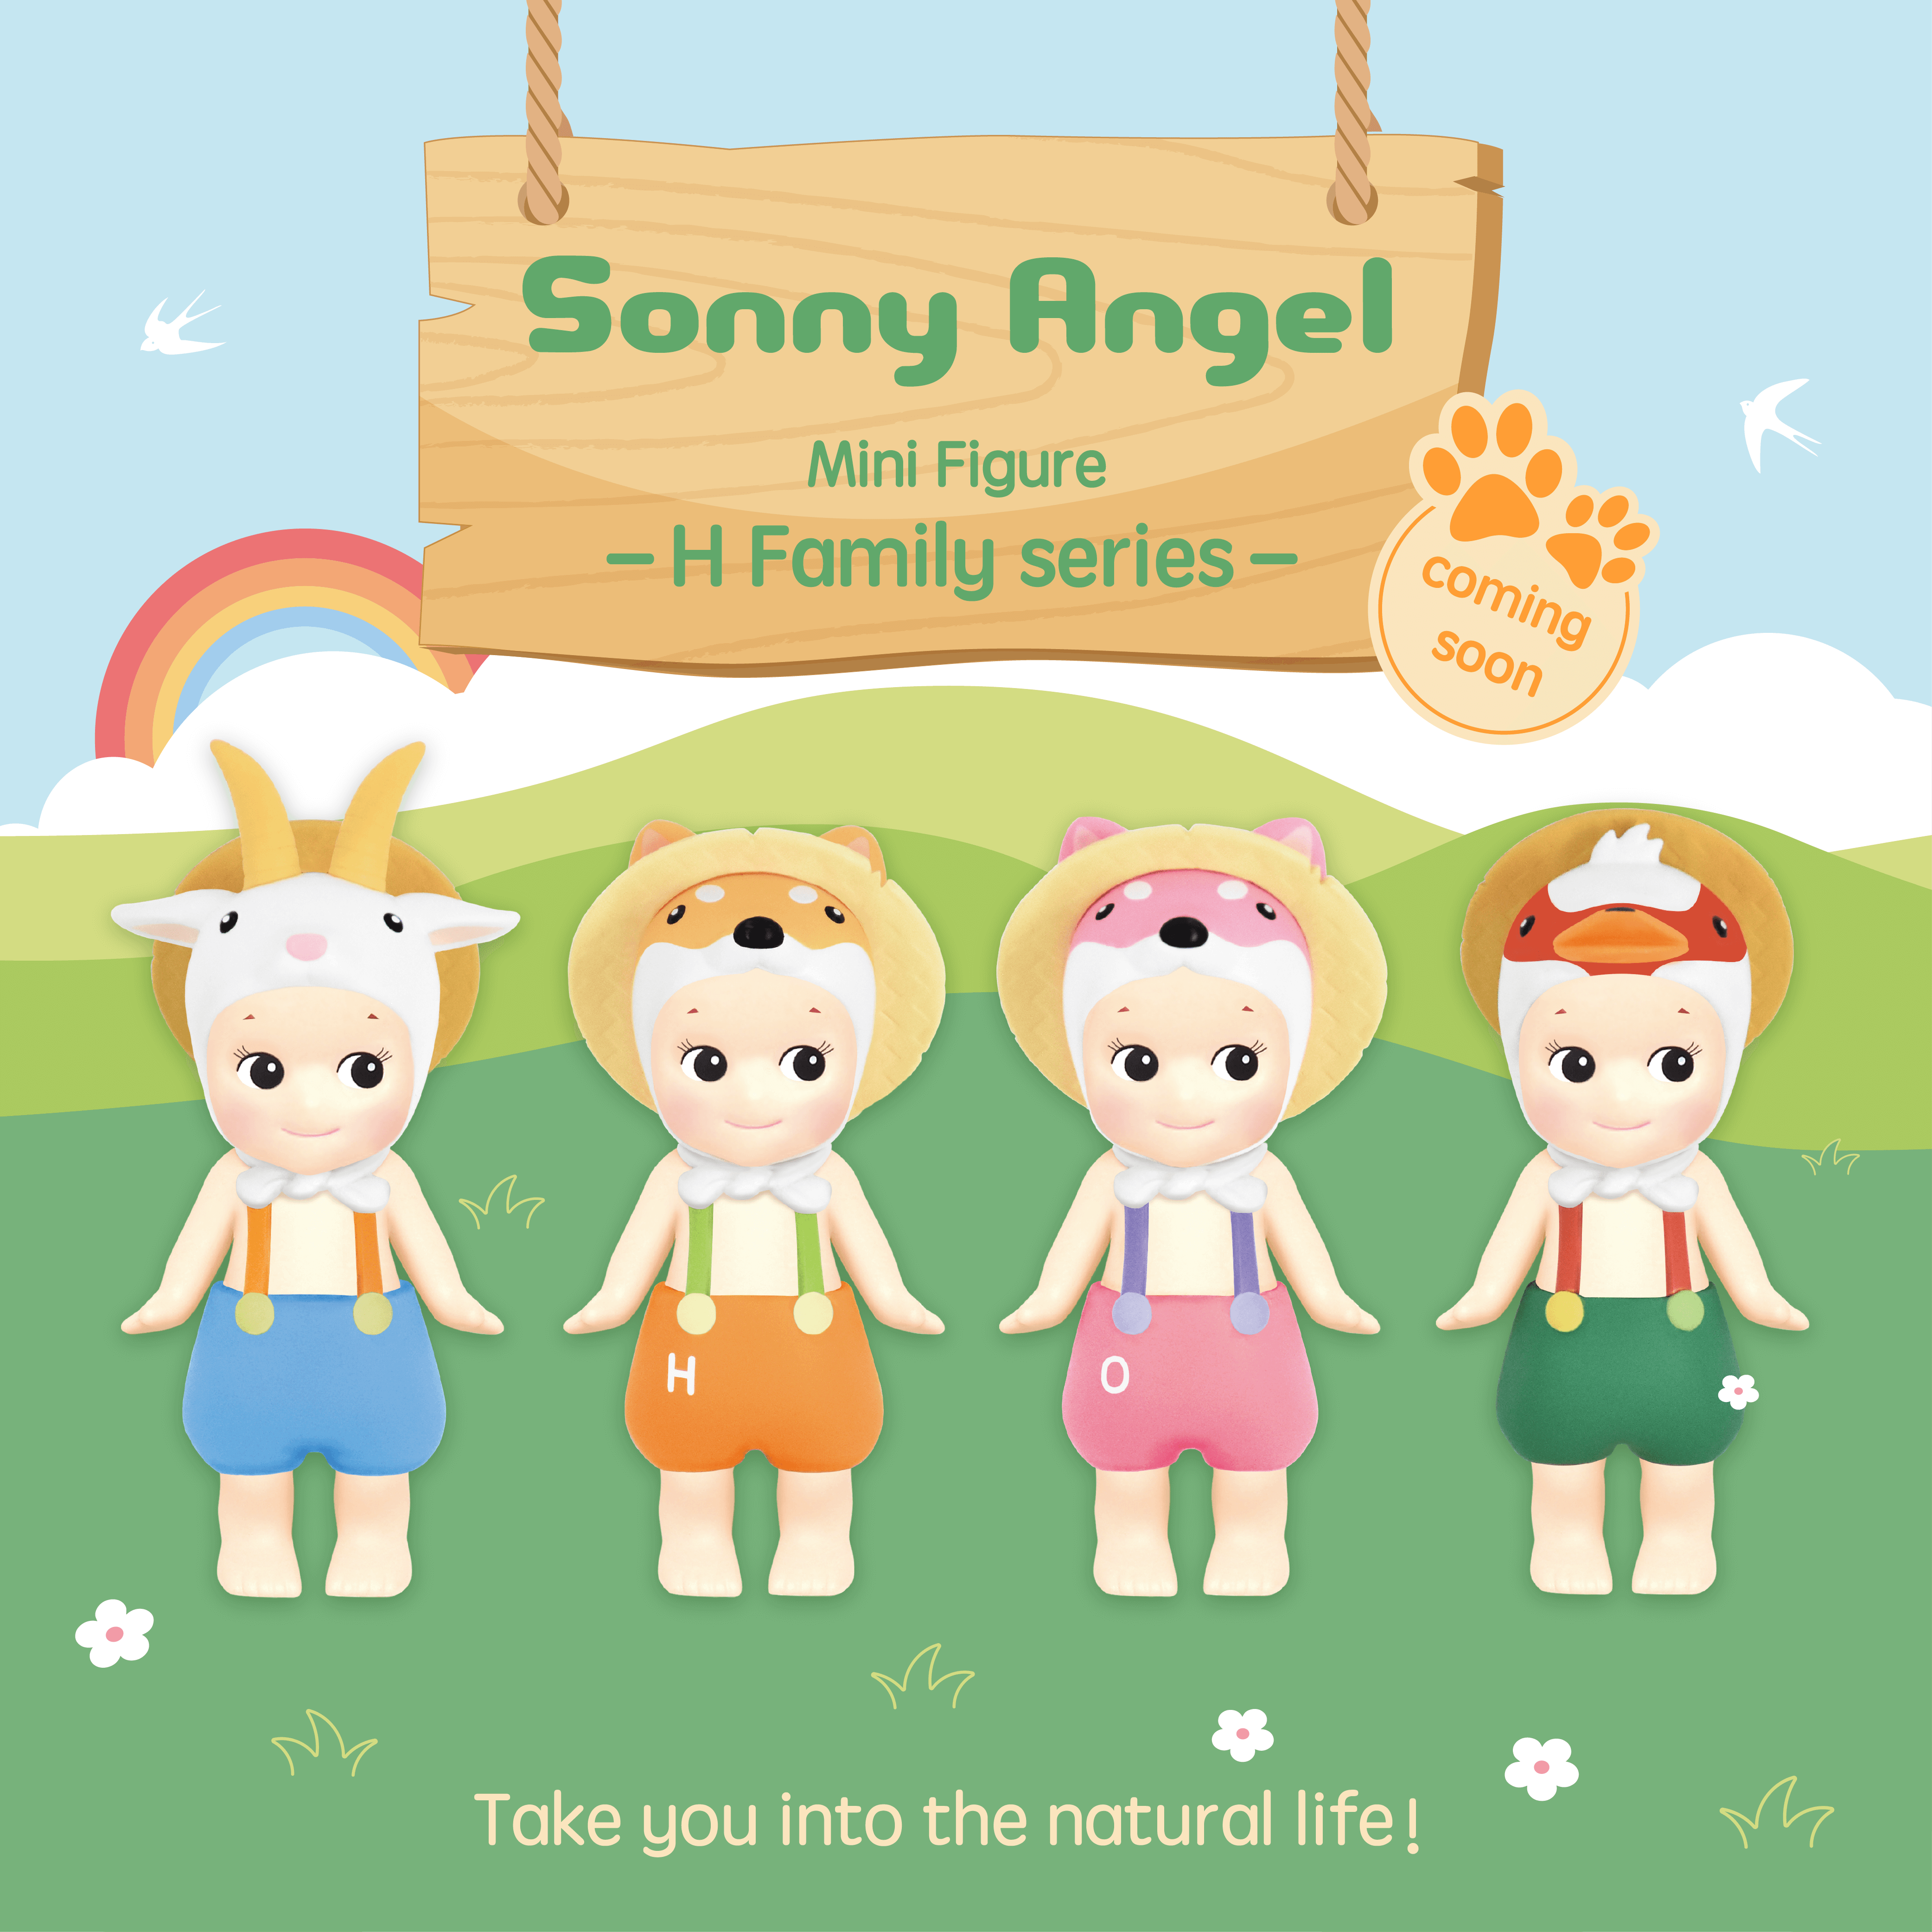 New Release: Sonny Angel is enjoying country life!『Sonny Angel -H 